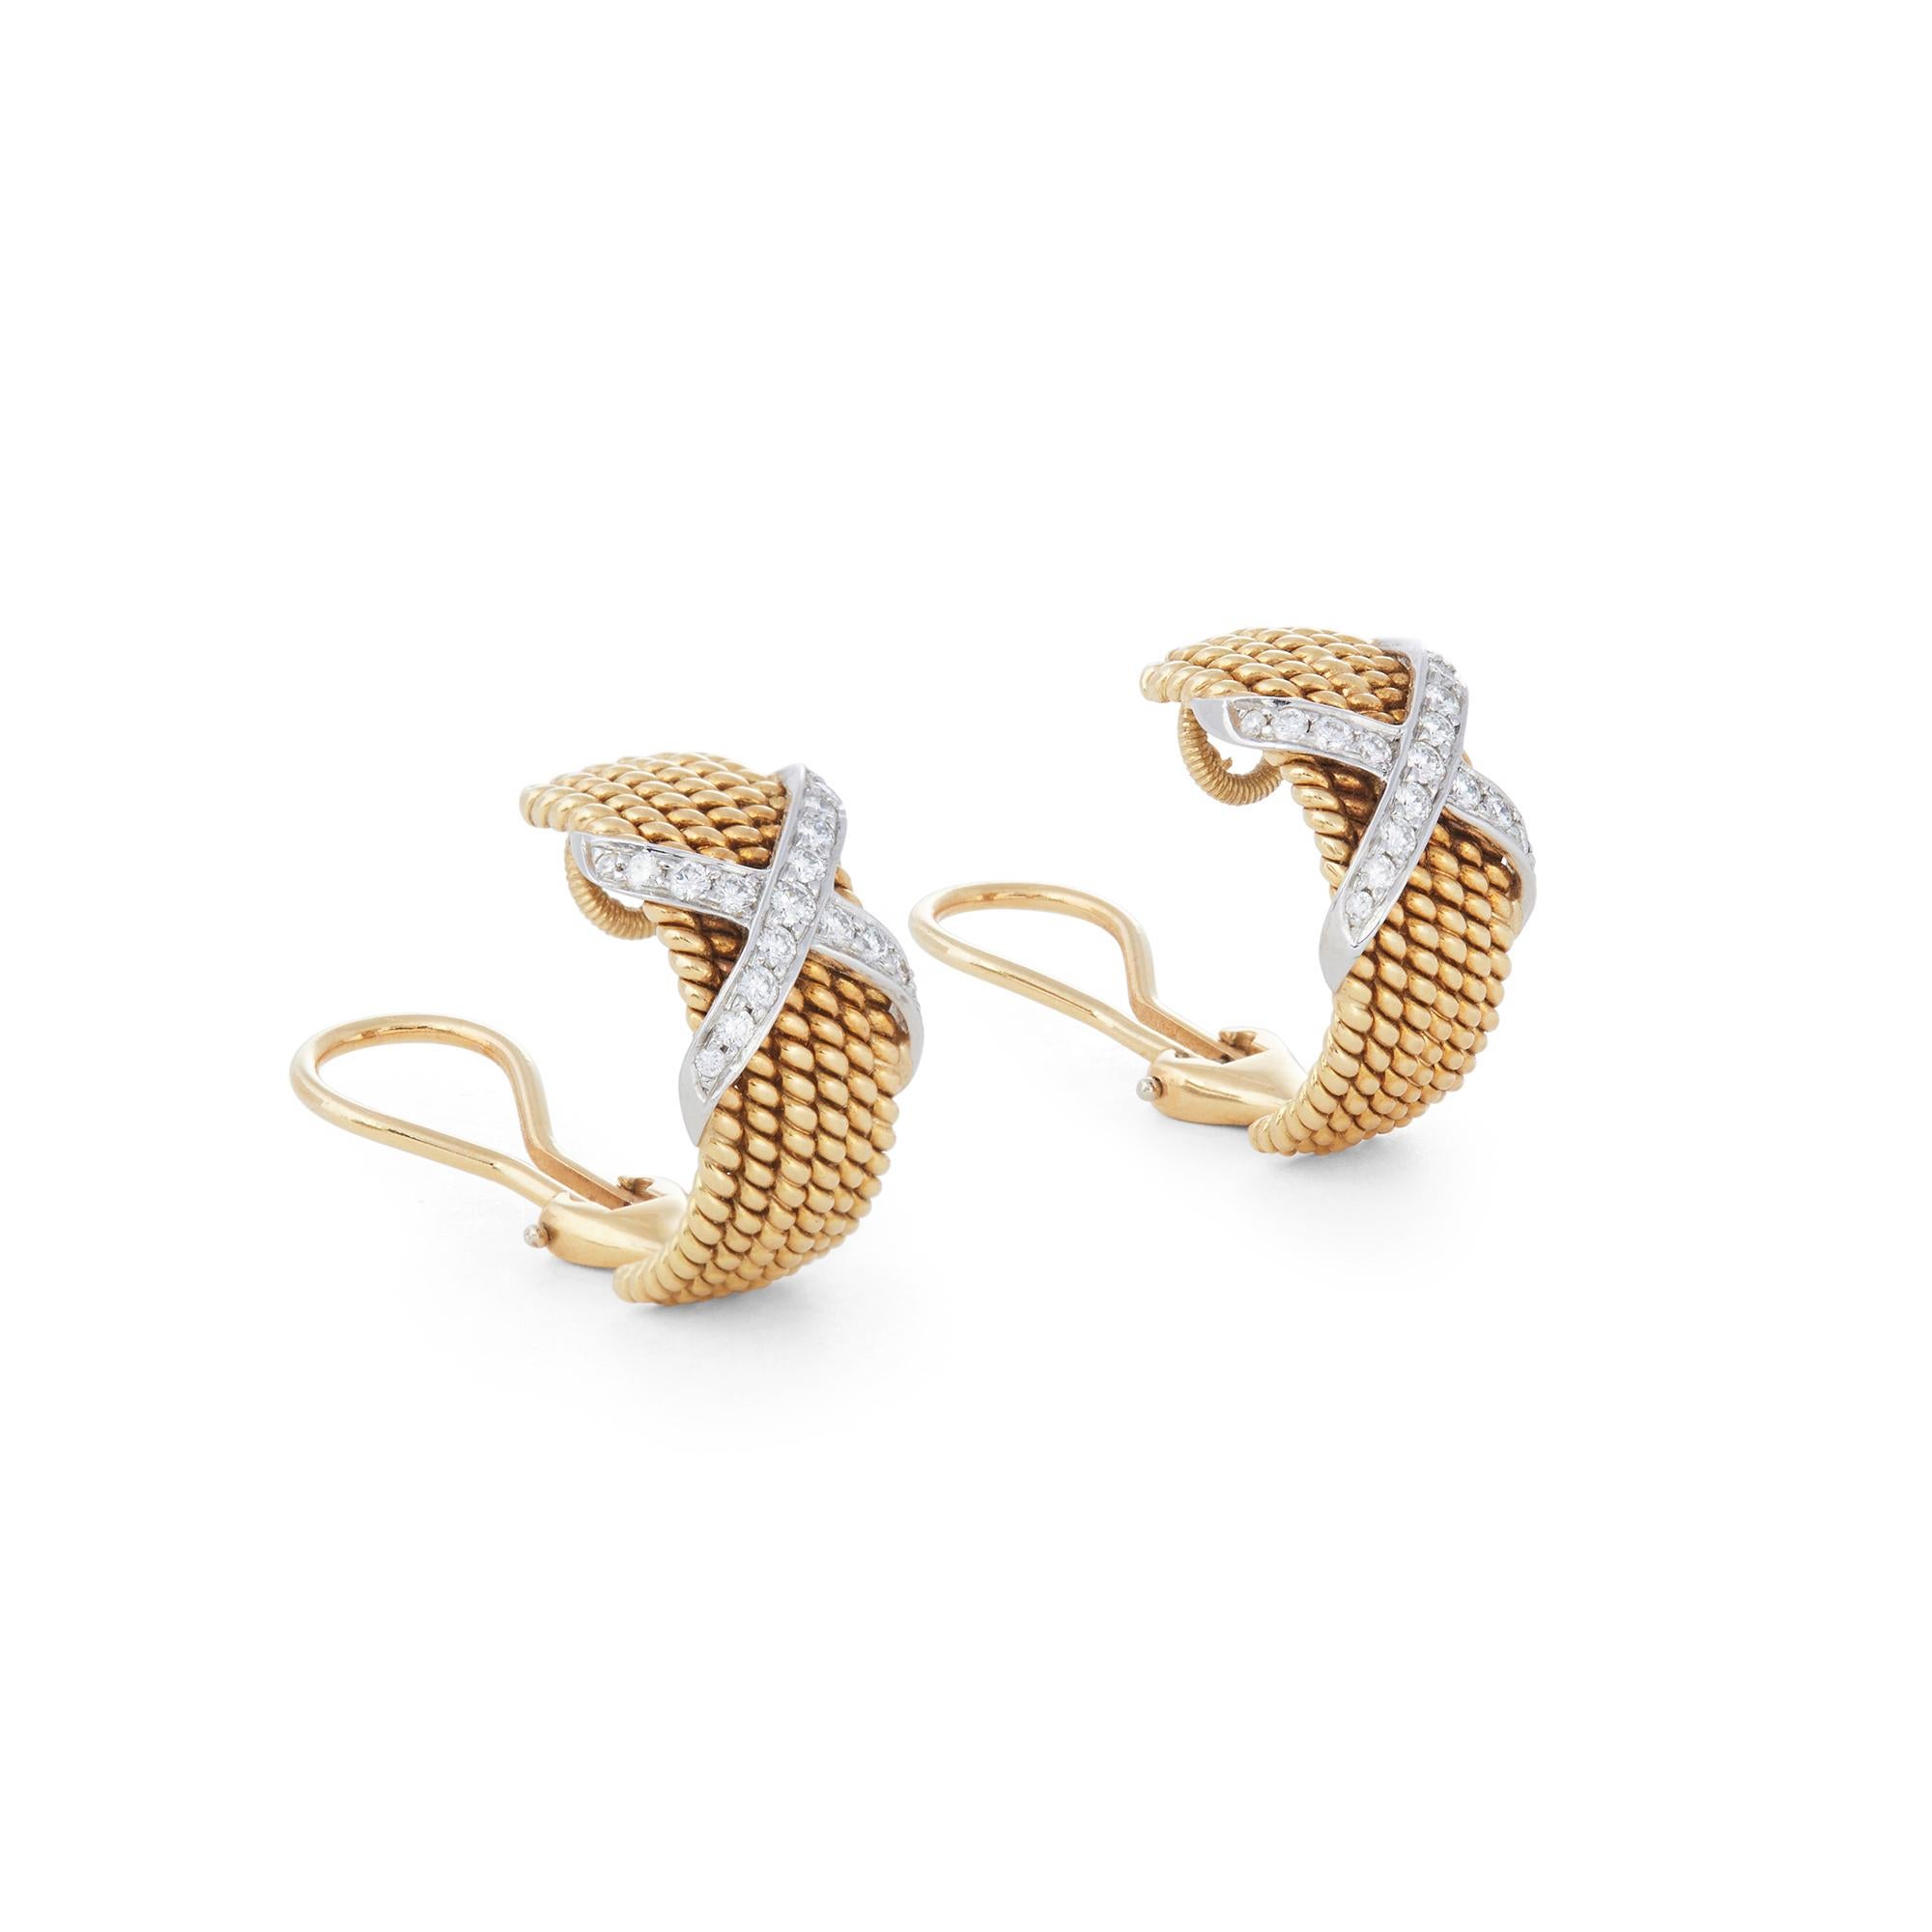 Contemporary Jean Schlumberger for Tiffany & Co. 'Rope Six-Row' Diamond Ear Clips